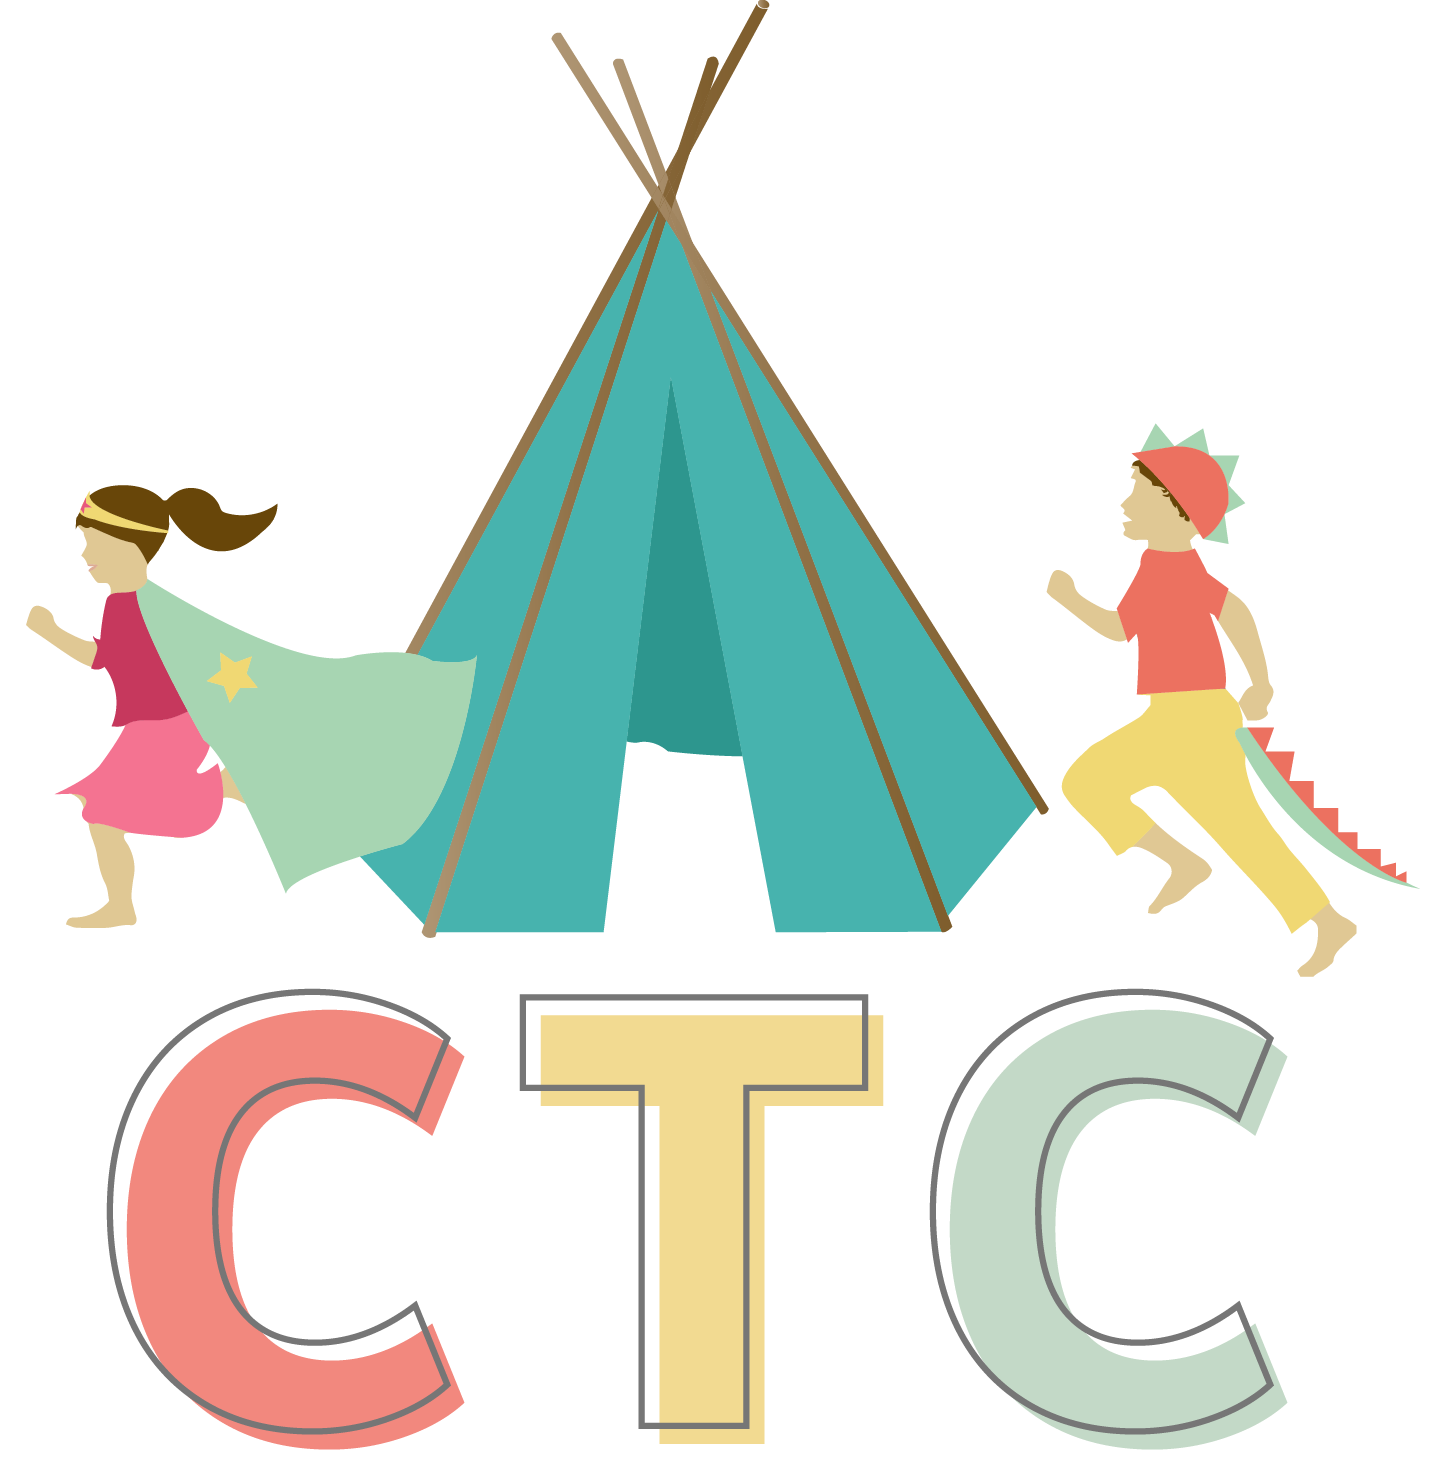 https://childrenstherapycenter.com/wp-content/uploads/2021/03/AVCTC-Branding_ACCTC.png